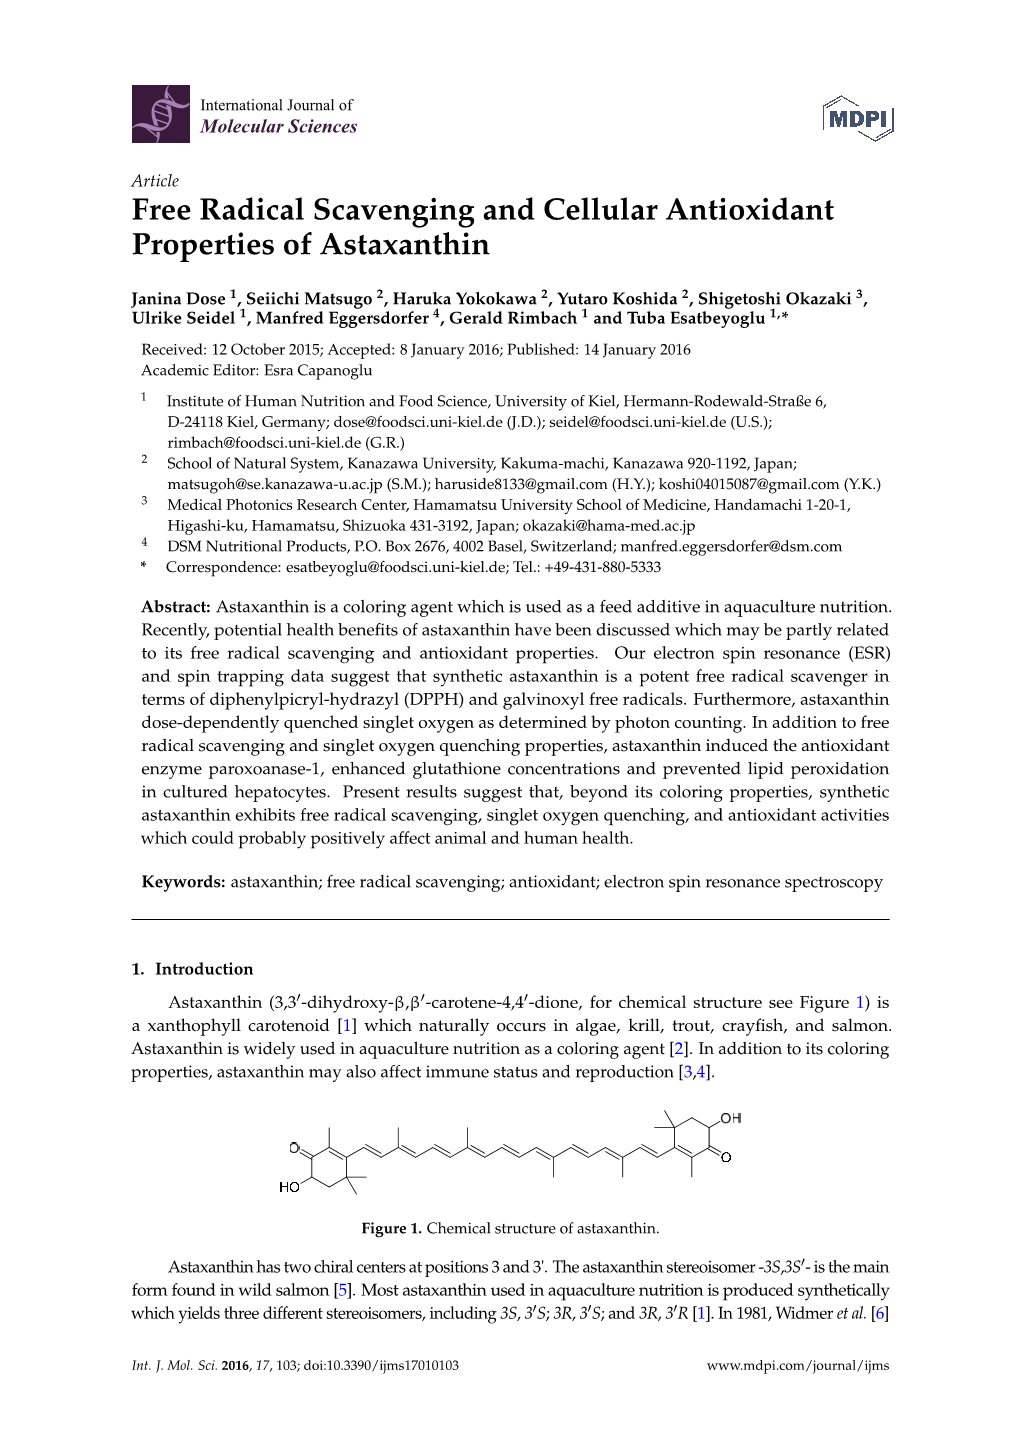 Free Radical Scavenging and Cellular Antioxidant Properties of Astaxanthin